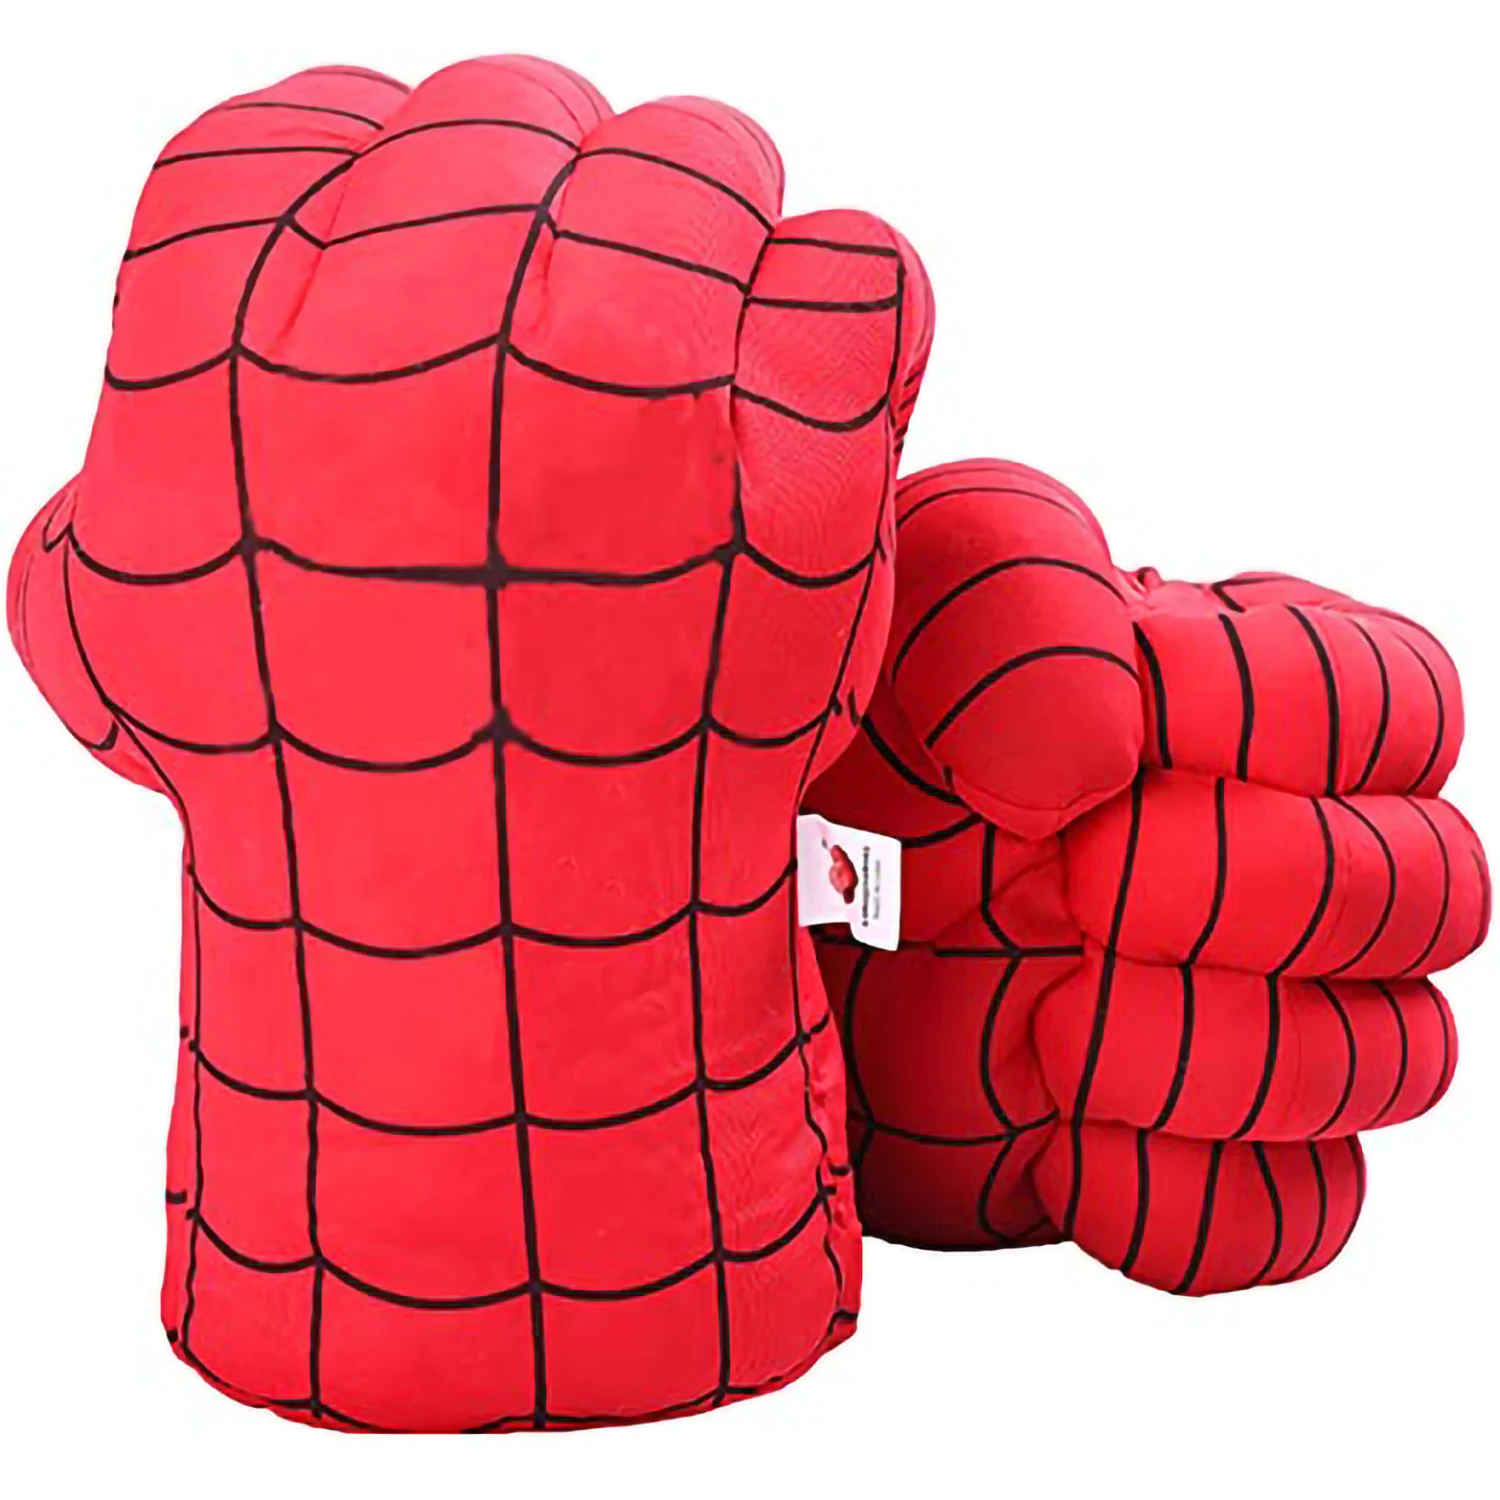 

Boys Incredible Smash Hands,Superhero Hands Gloves Kids Cosplay Costumes Fists